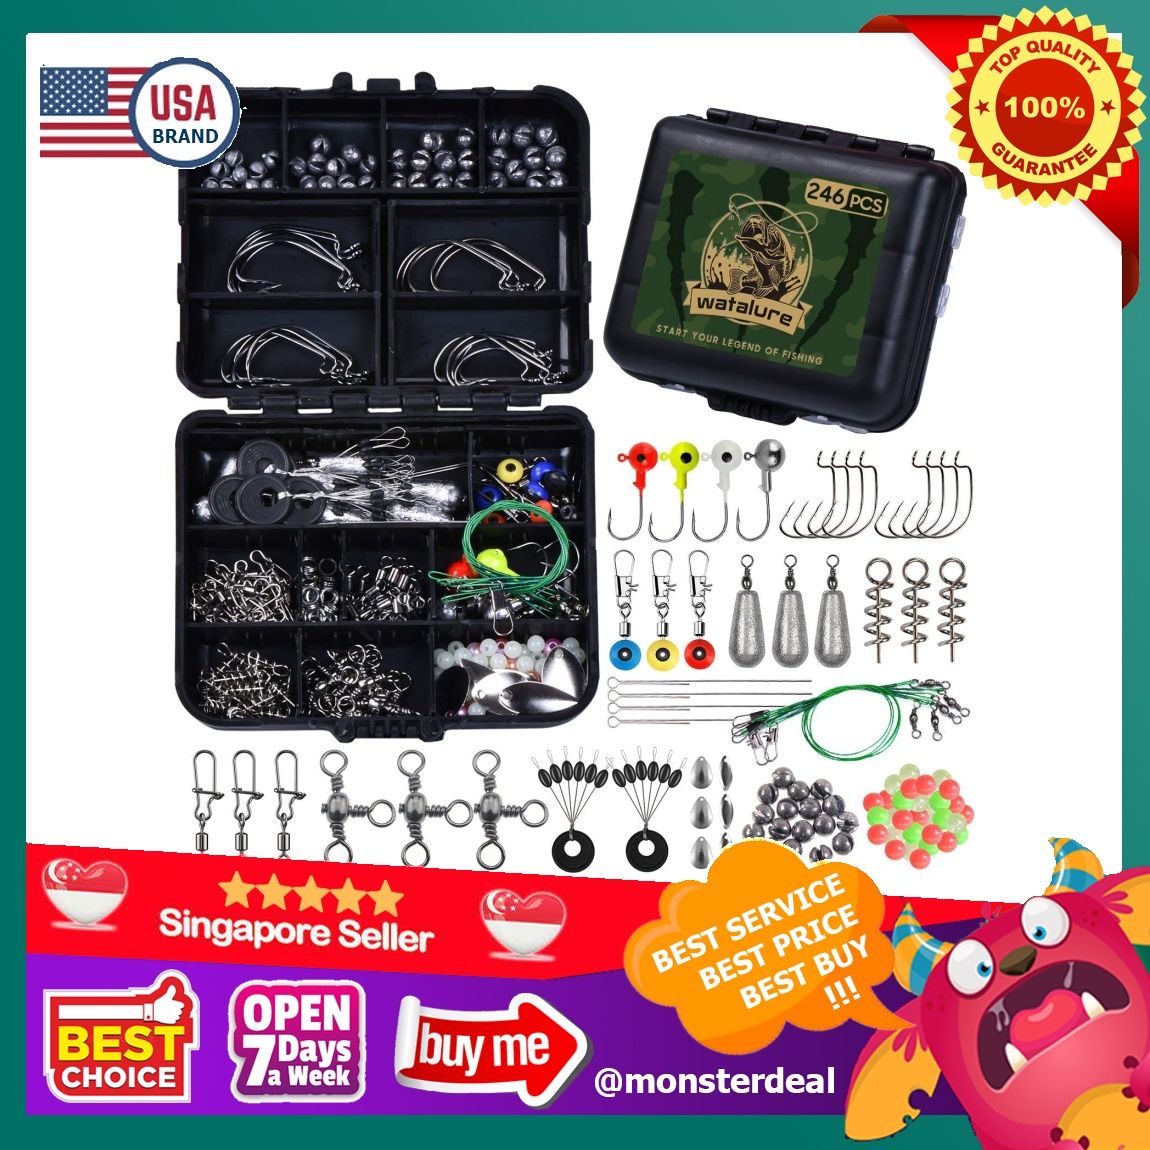 160pcs/box Fishing Accessories kit with Tackle Box,Including Fishing  Swivels Snaps, Bass Casting Sinker Weights, Fishing Line Beads,Jig Hooks  price in UAE,  UAE